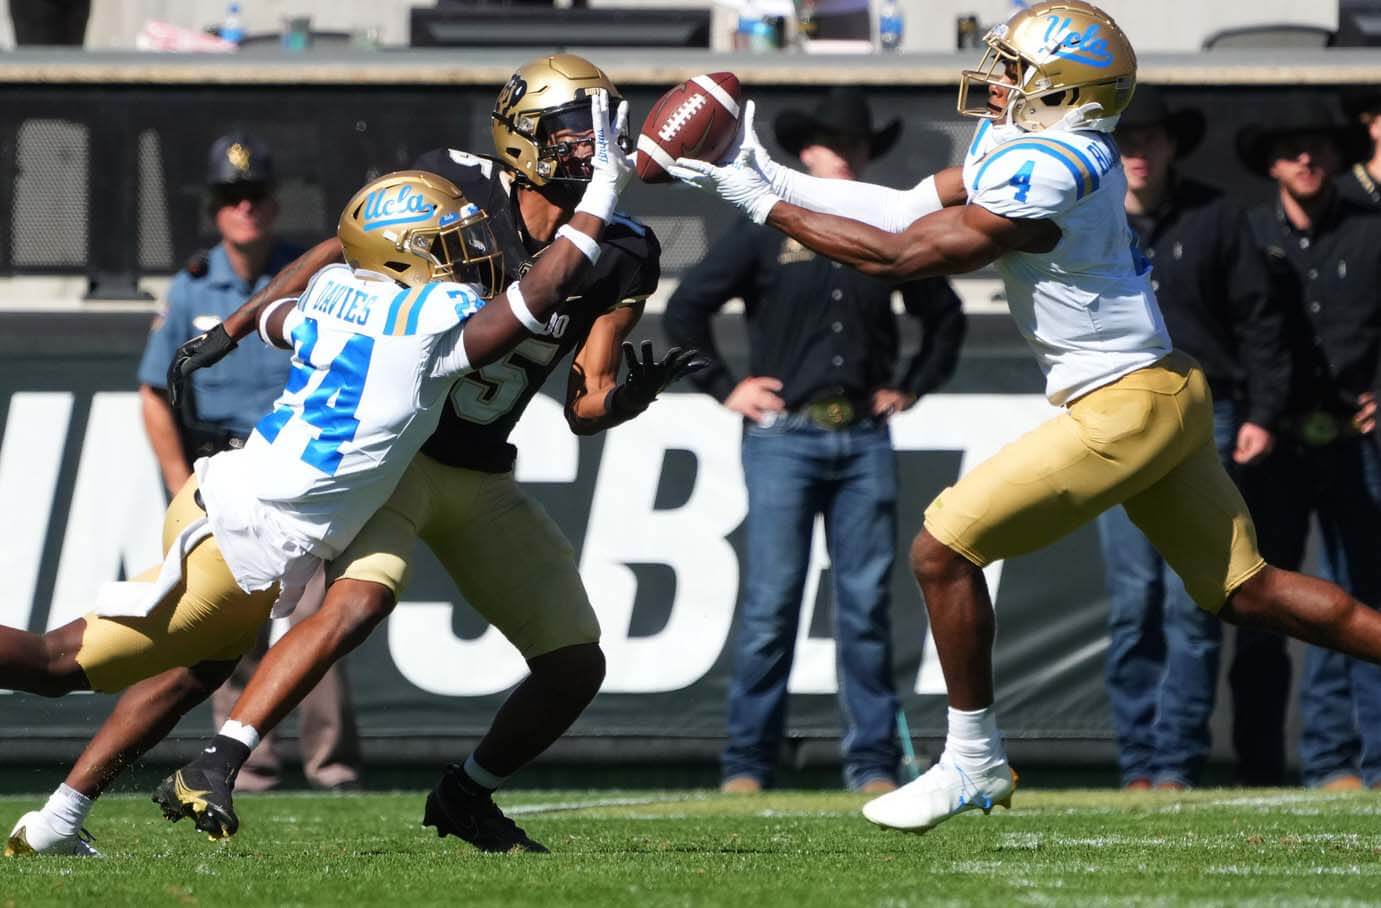 UCLA Bruins defensive back Jaylin Davies (24) and defensive back Stephan Blaylock (4) break up a pass to Colorado Buffaloes wide receiver Chase Sowell (15) in the second half at Folsom Field.